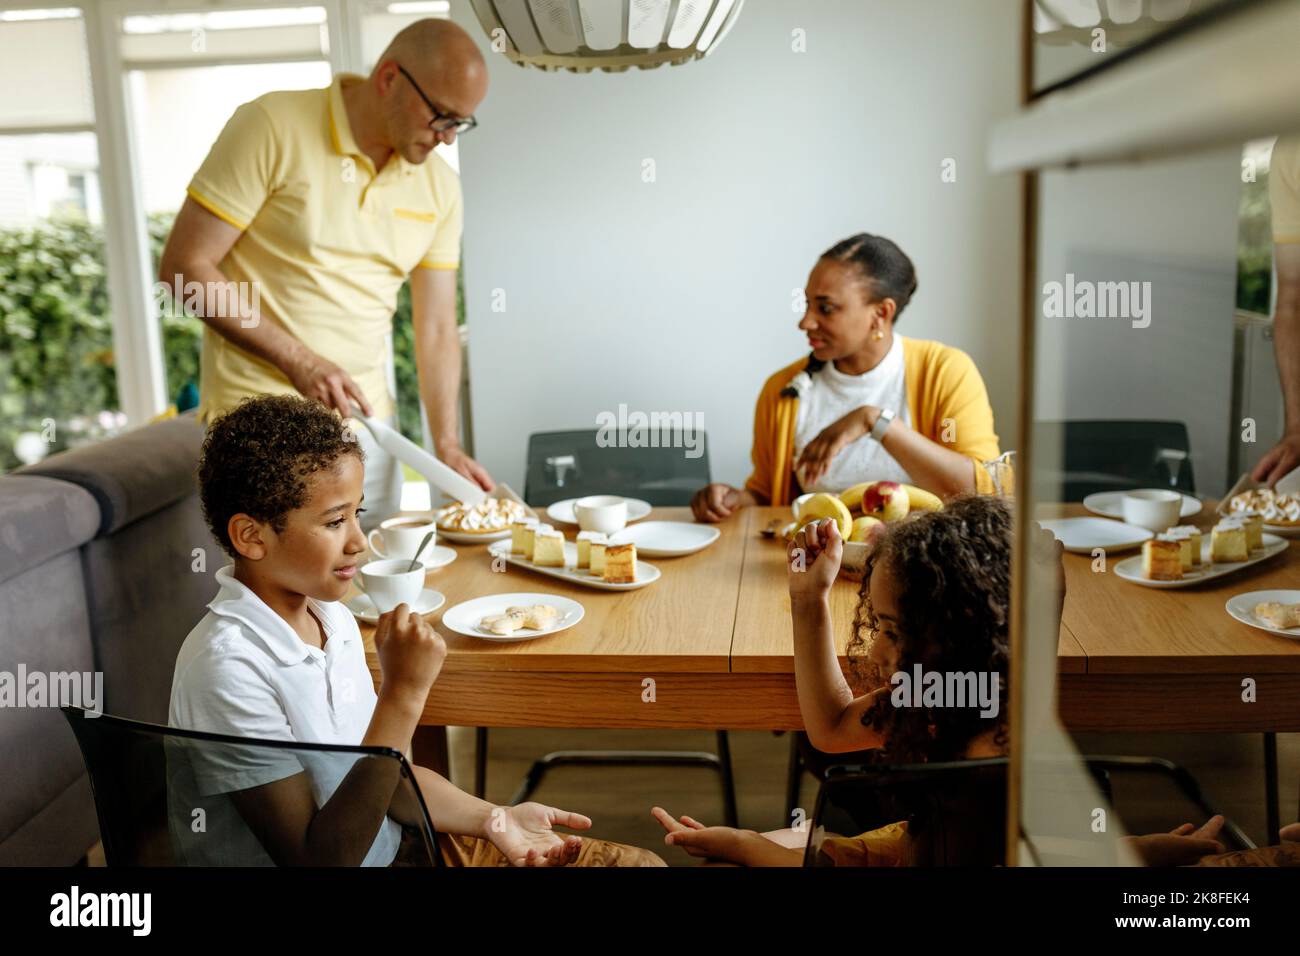 Children playing rock paper scissors game by parents at dining table Stock Photo